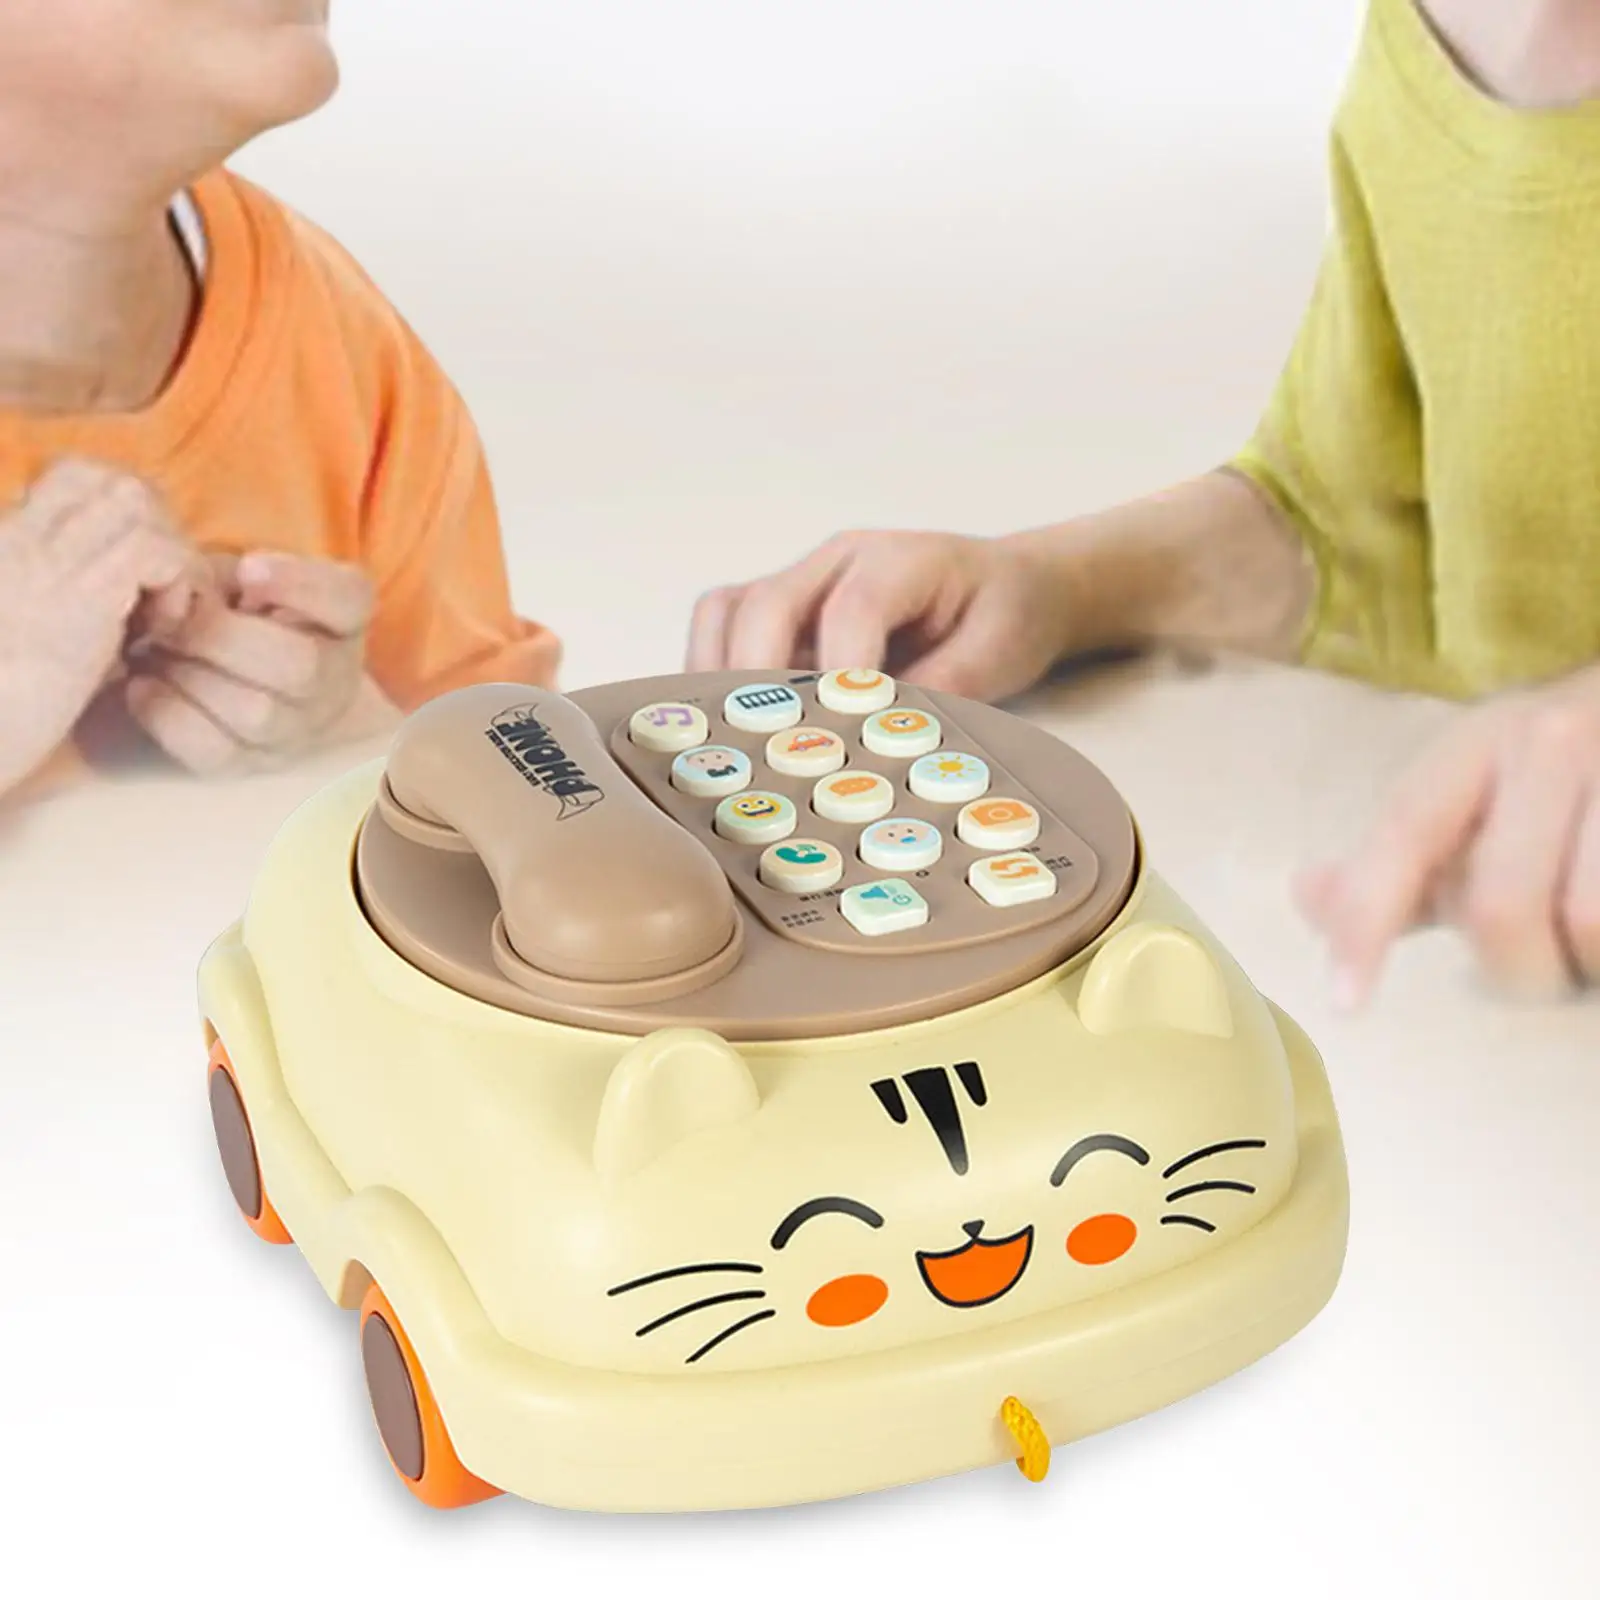 Cognitive Development Toy Lights Musical Montessori Baby Musical Toy Pretend Phone for Children Early Education Gift Boy Girl